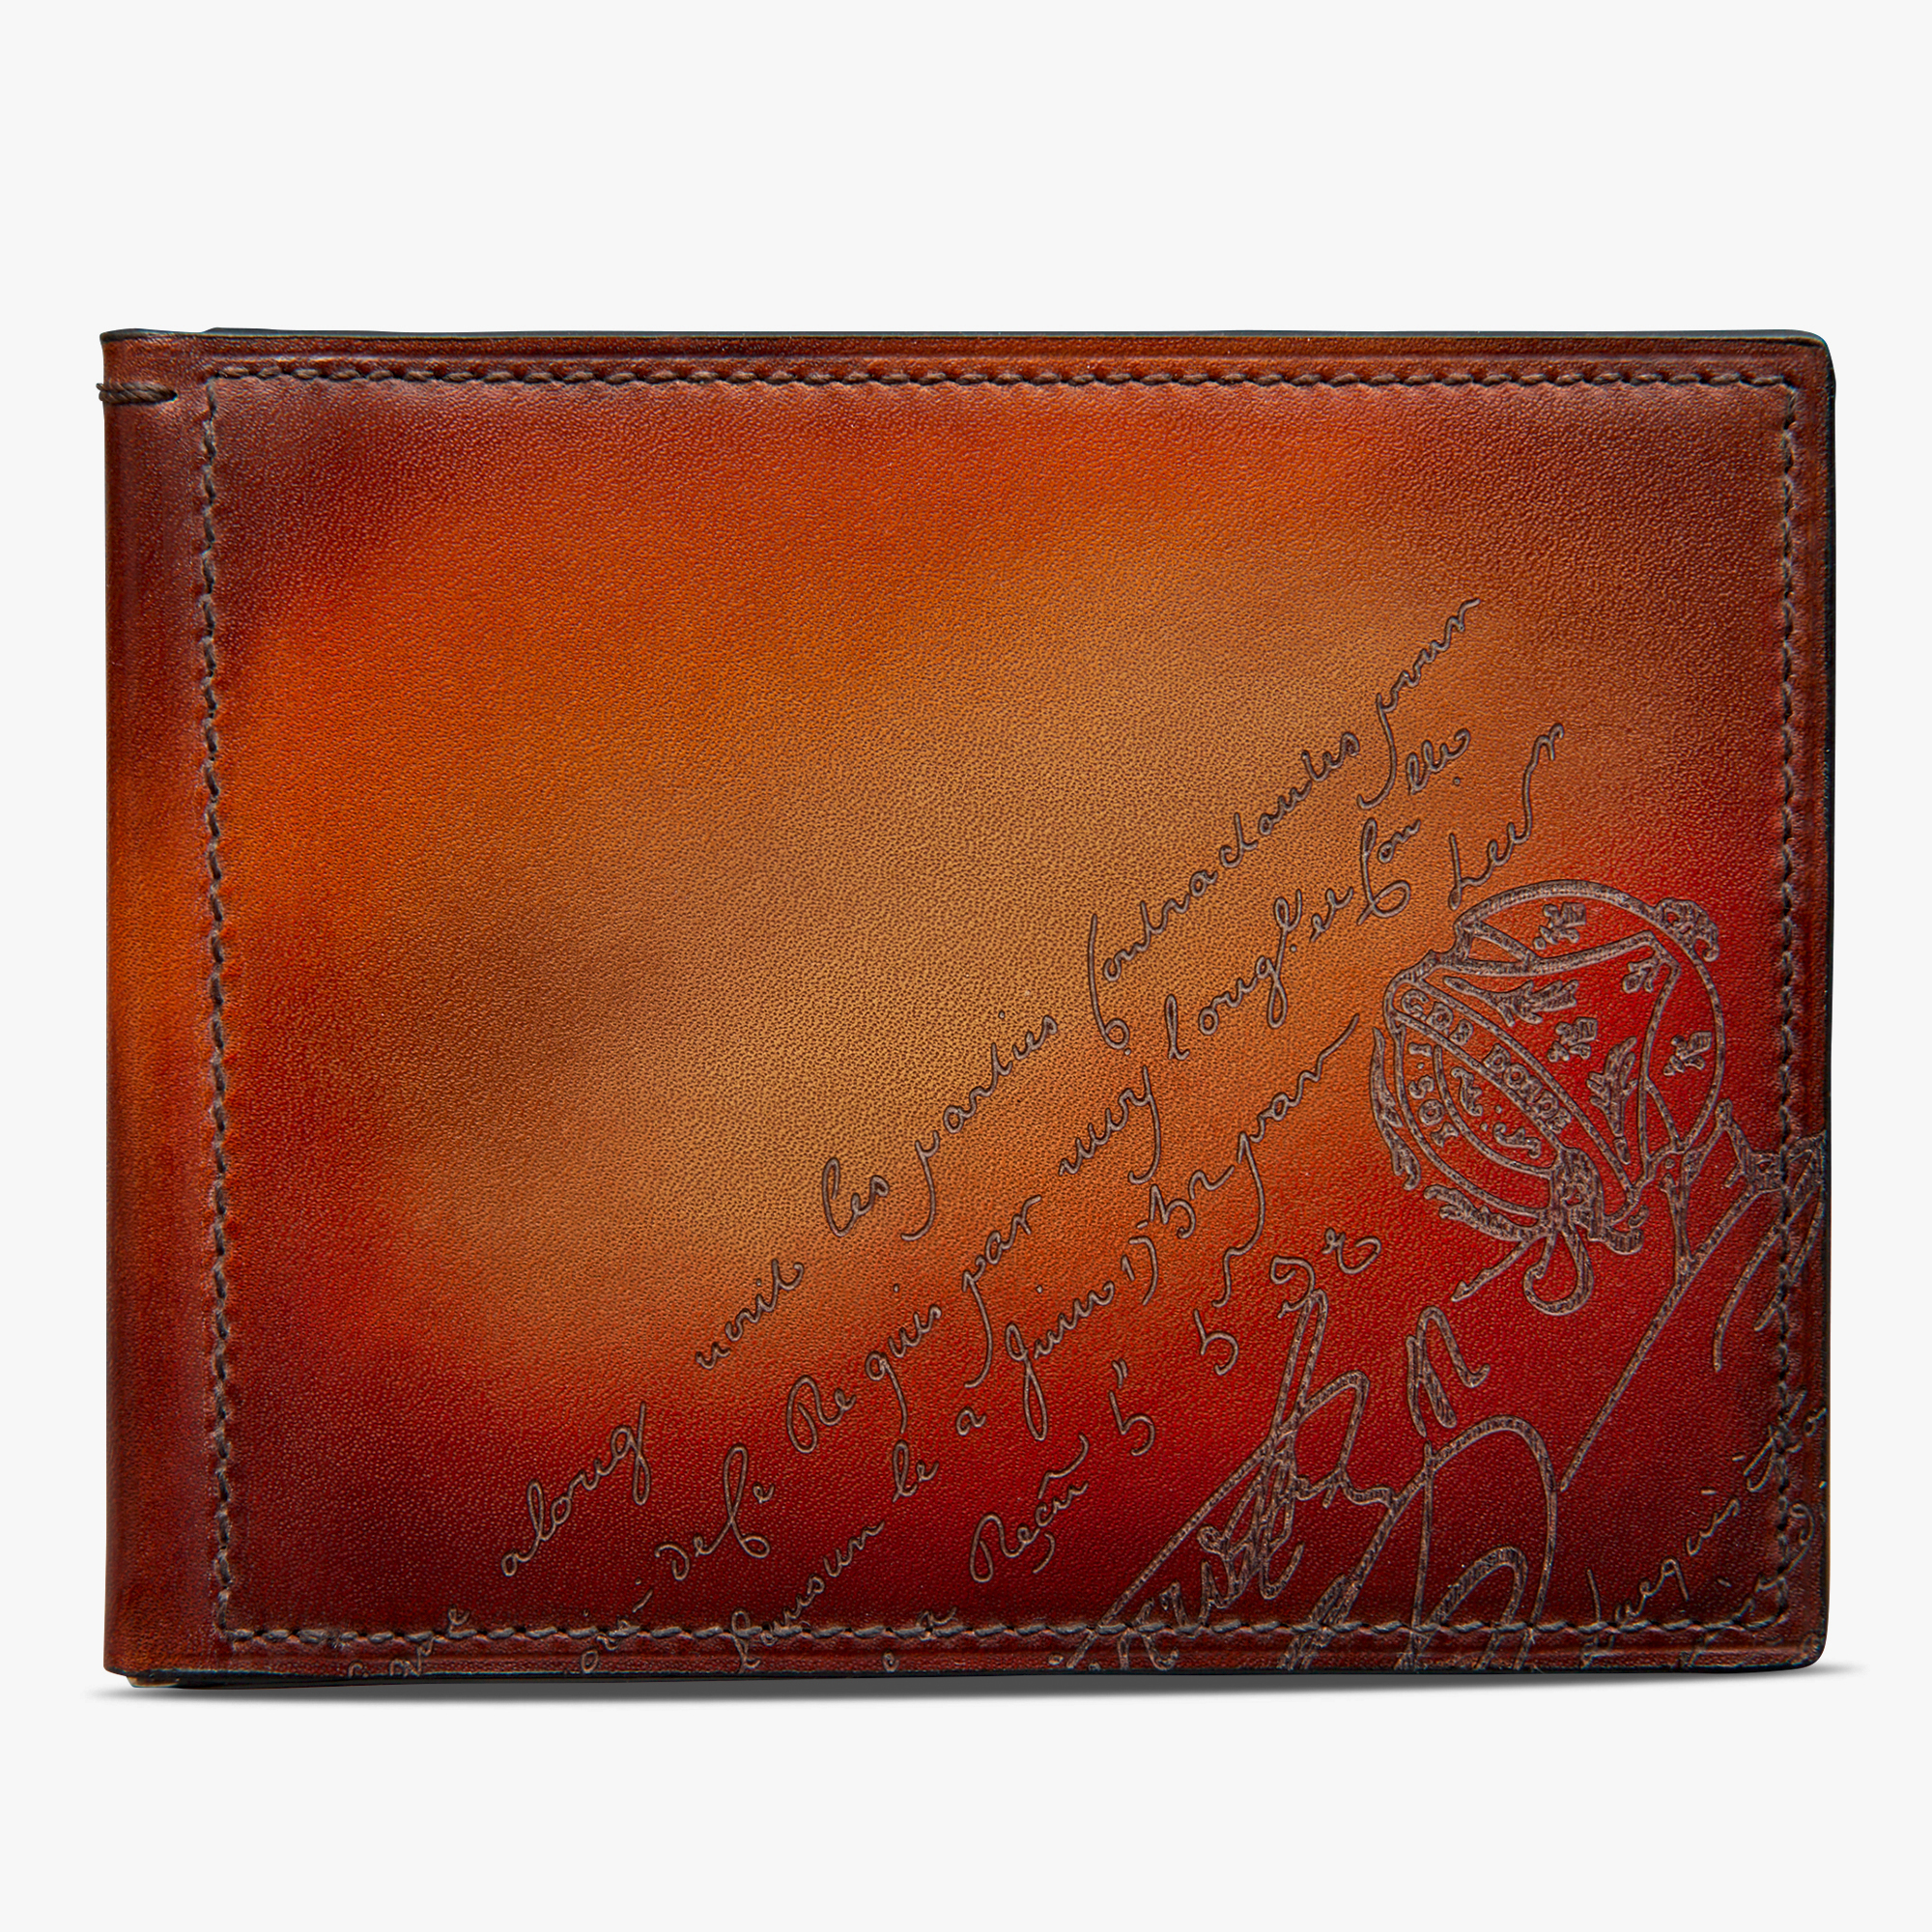 Portefeuille Figure En Cuir Scritto Swype, RED SUNSET, hi-res